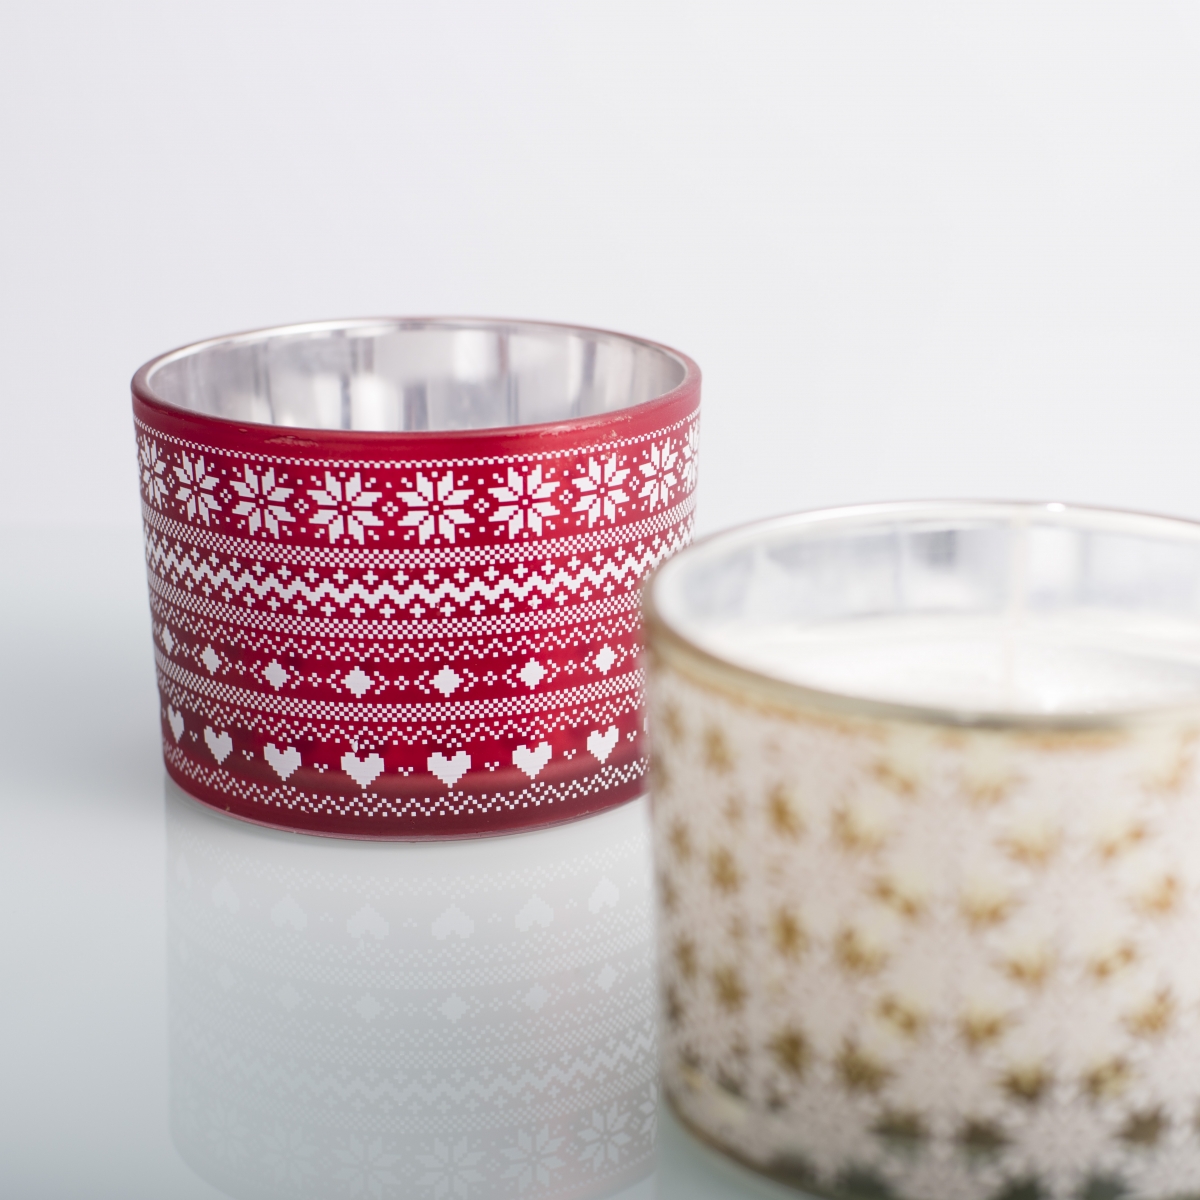 Scented Candles -White Snowflake ,Red Sliver Glass Pots ,Christmas Candles ,China Factory ,Price-HOWCANDLE-Candles,Scented Candles,Aromatherapy Candles,Soy Candles,Vegan Candles,Jar Candles,Pillar Candles,Candle Gift Sets,Essential Oils,Reed Diffuser,Candle Holder,